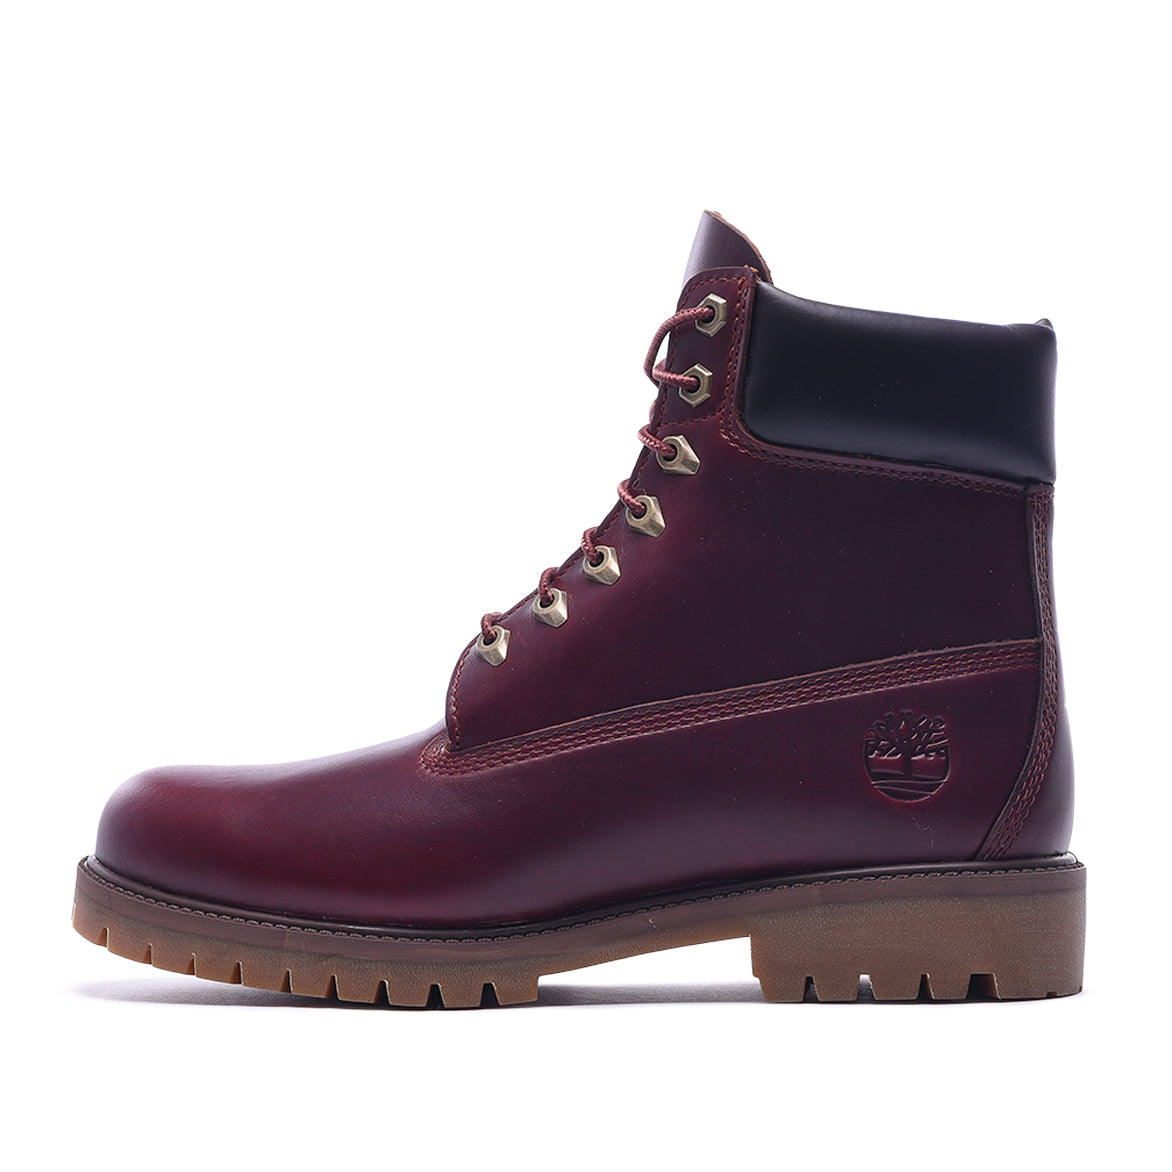 nfl timberland boots